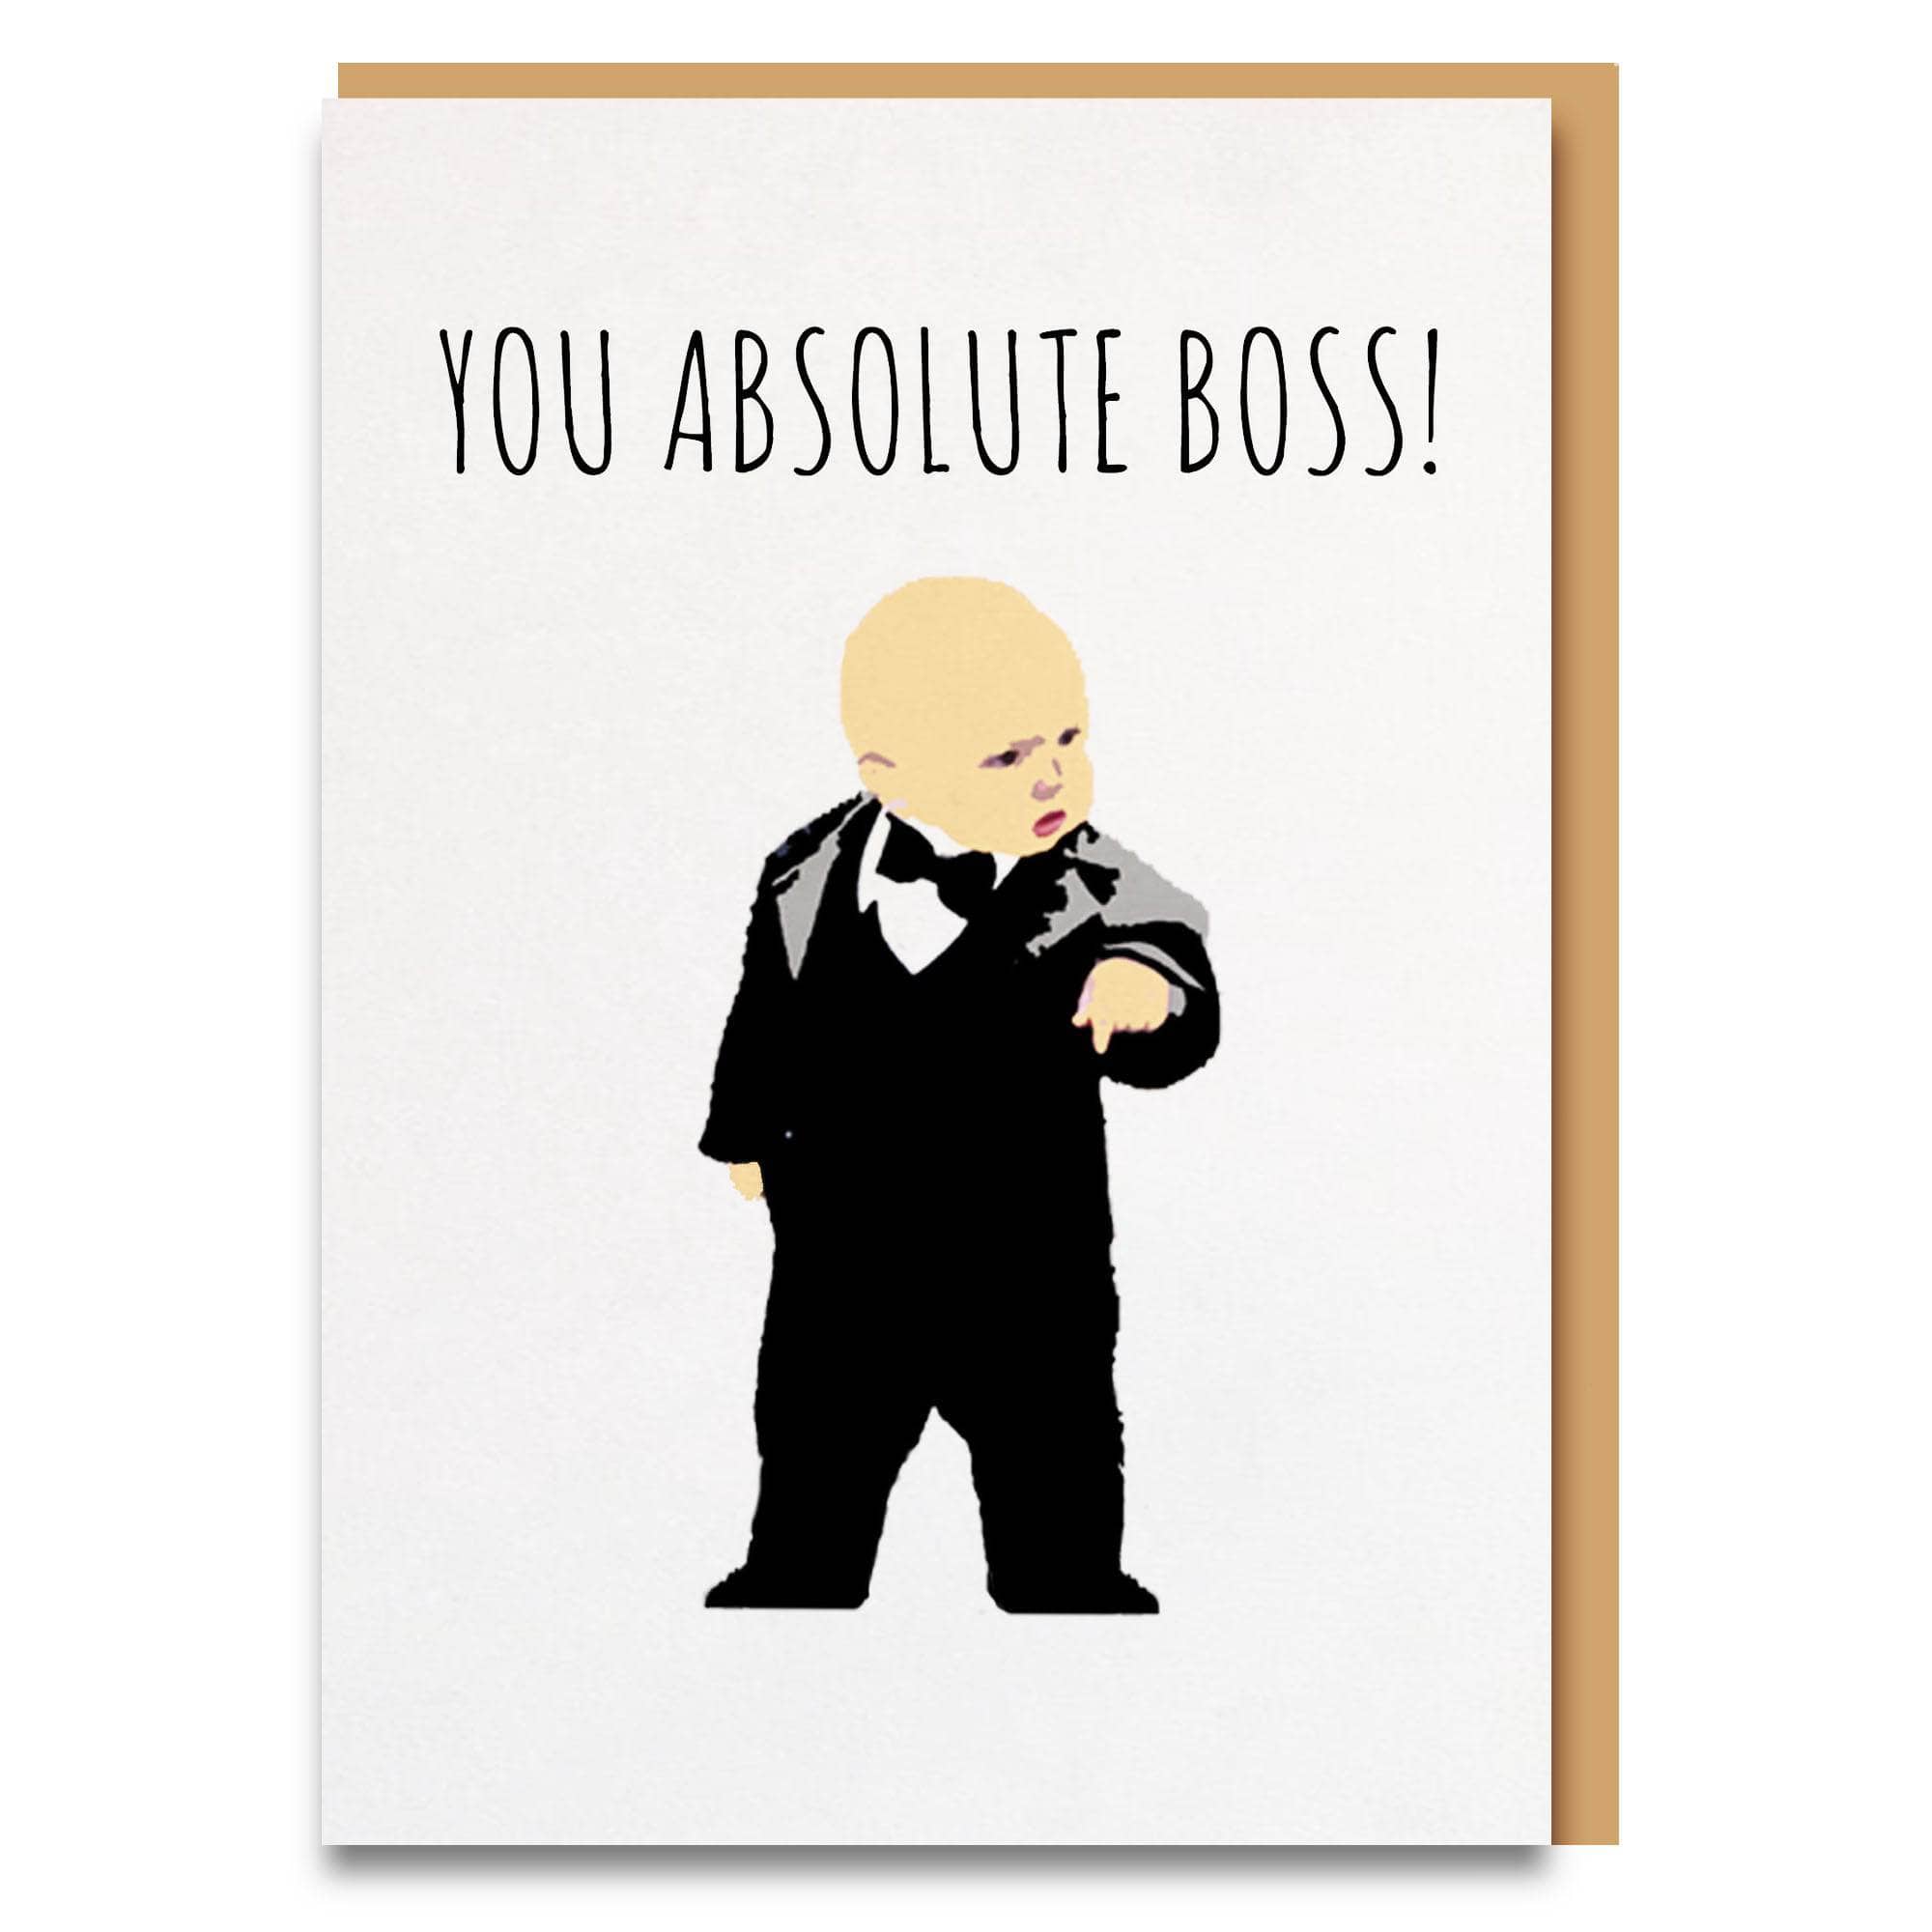 Funnyand sweet "absolute boss" congratulations card for new job, passed or exam or any time they've won at life!